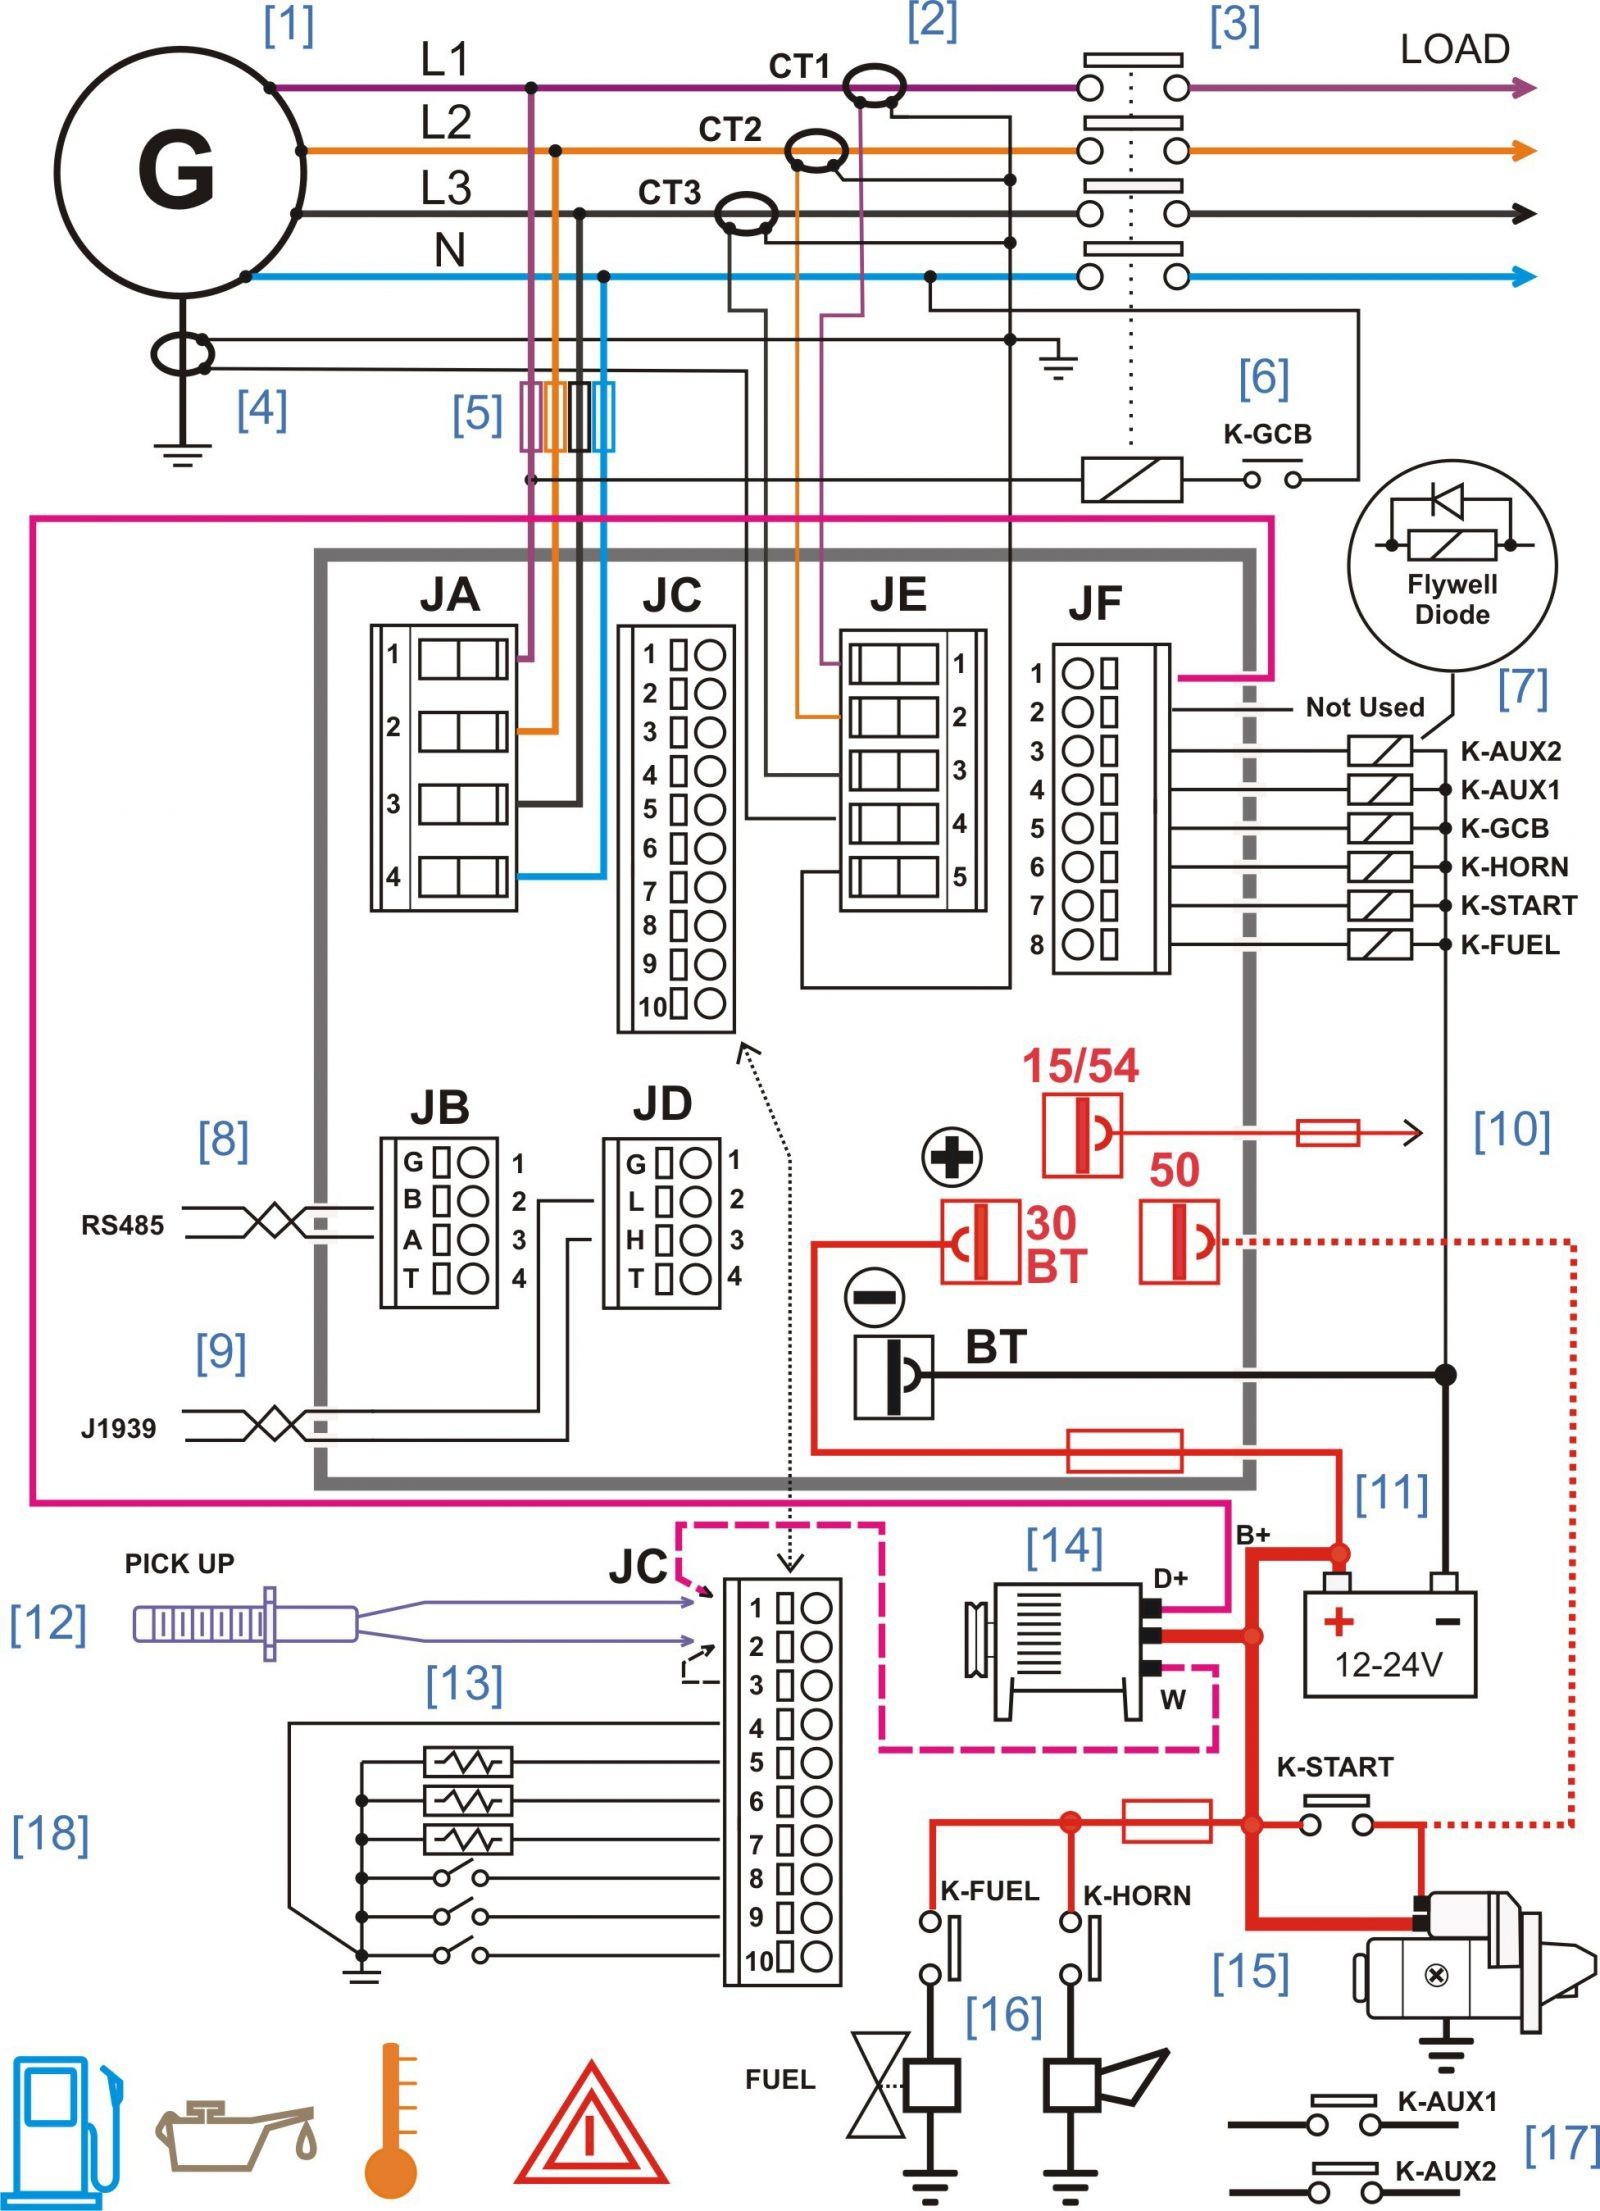 Car Audio Wire Diagram Lovely Car Stereo Wiring Diagram Diagram Of Car Audio Wire Diagram